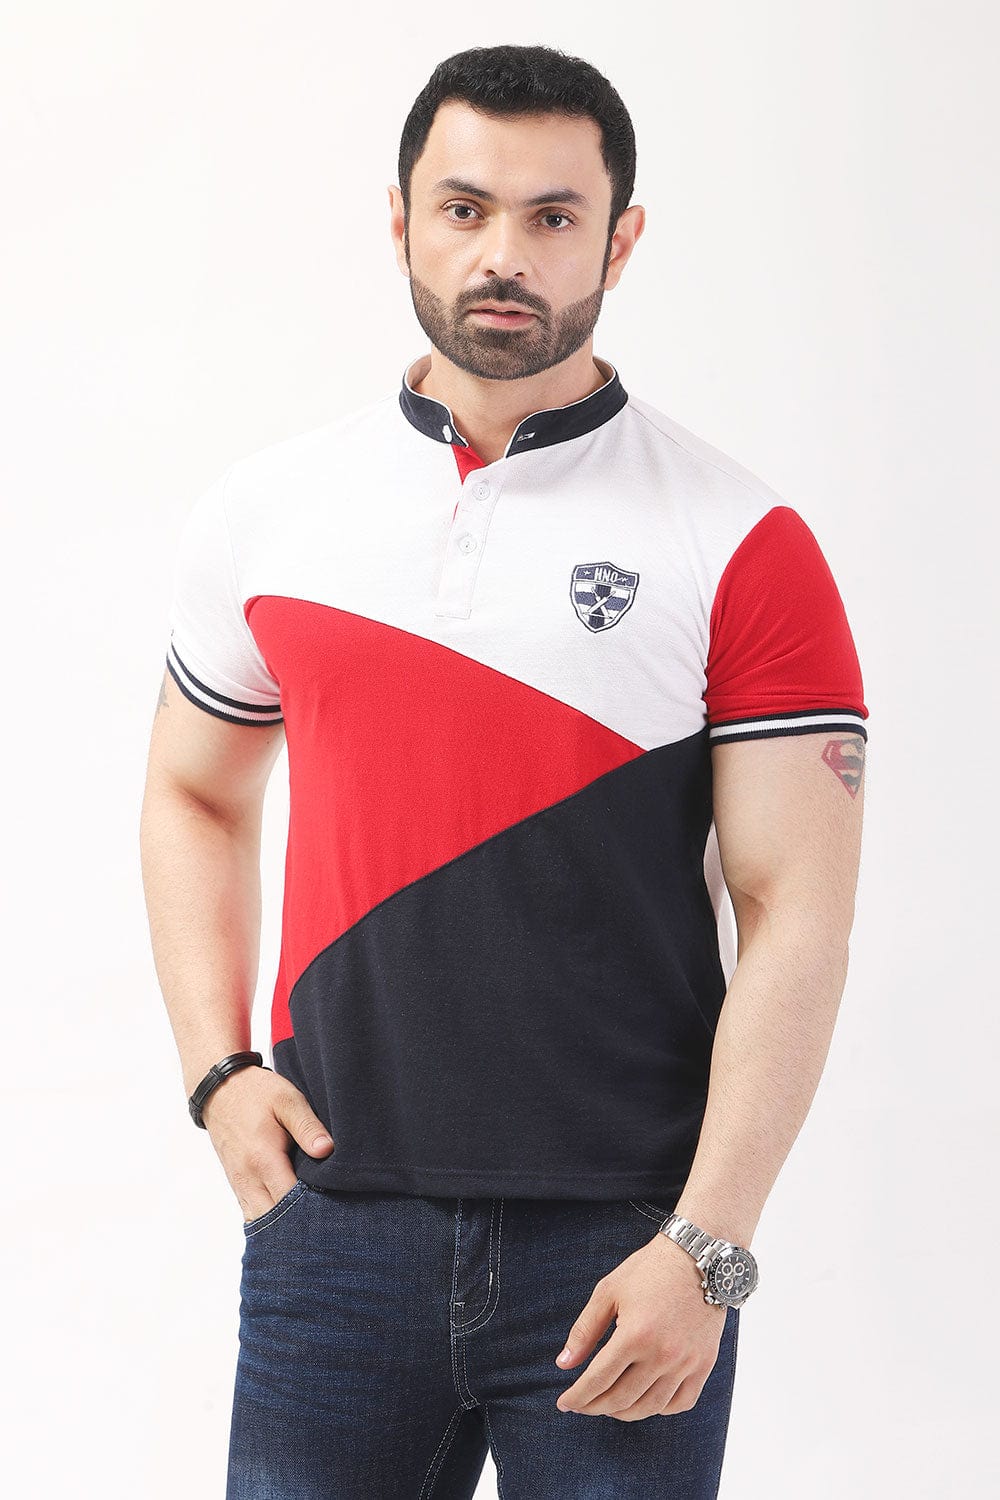 Hope Not Out by Shahid Afridi Men Polo Shirt Contrast Panelled Embroidered Ban Polo